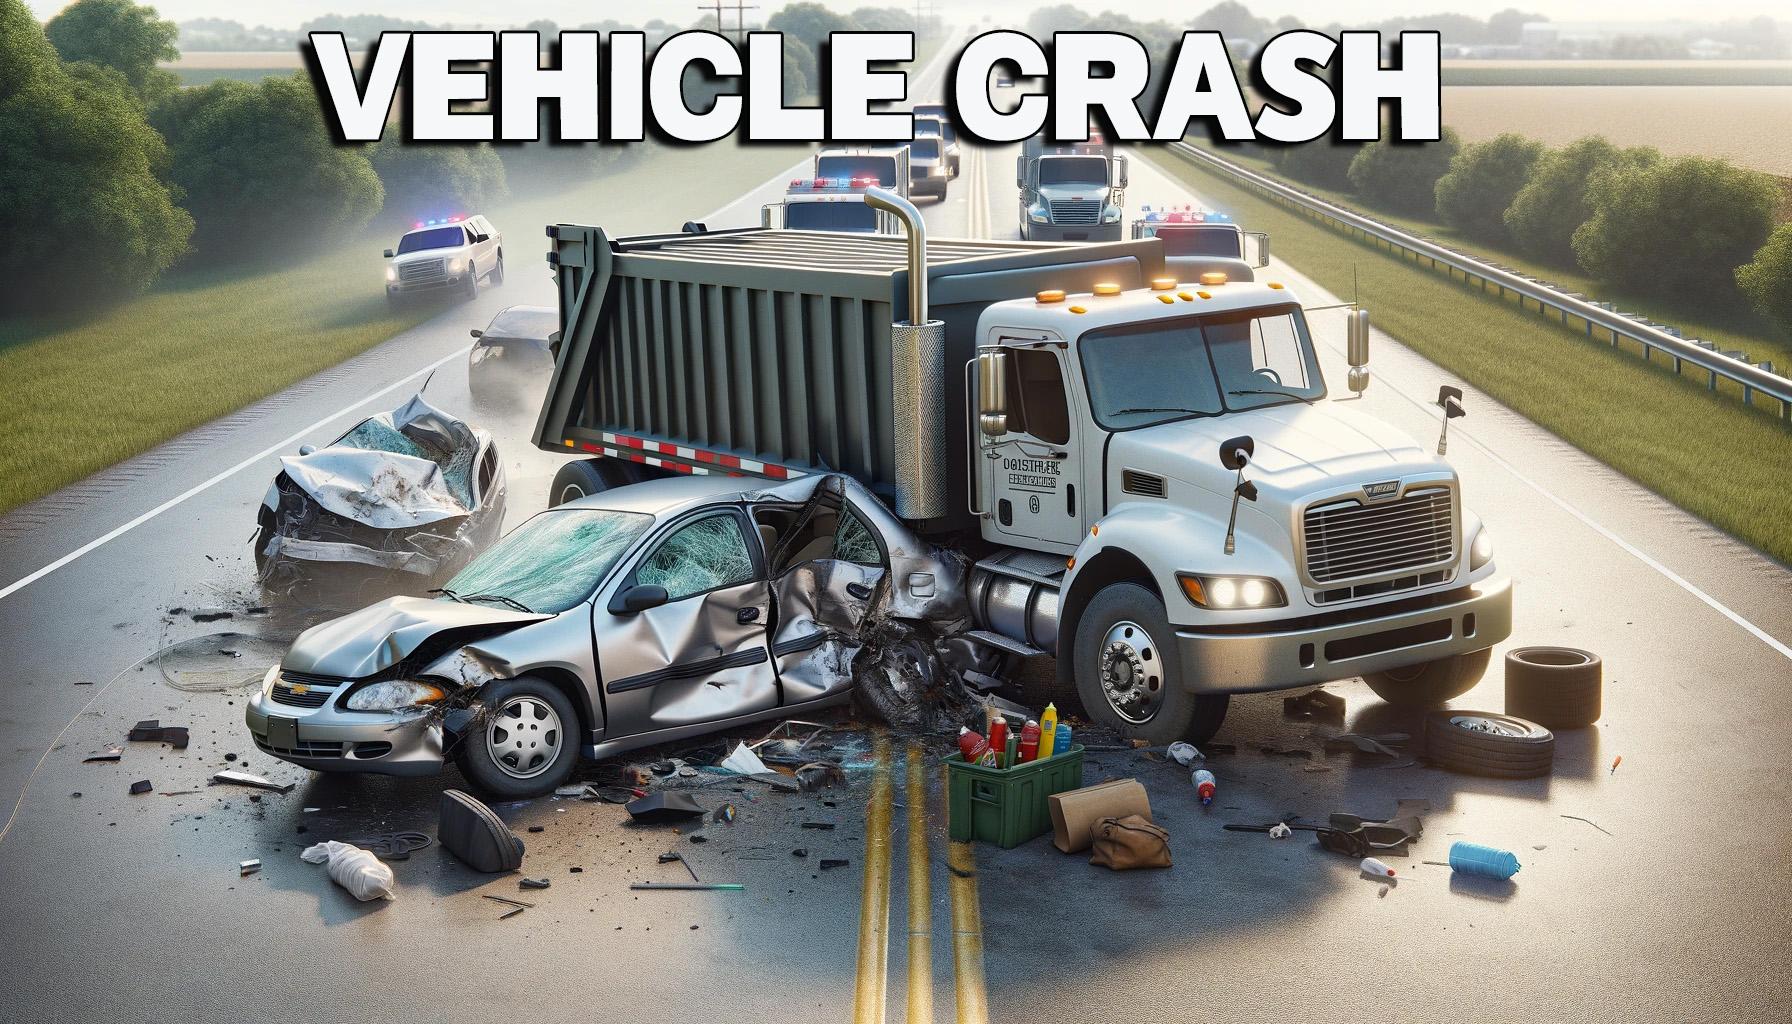 Freightliner Trash Truck and Chevy Cavaliar accident or crash news graphic